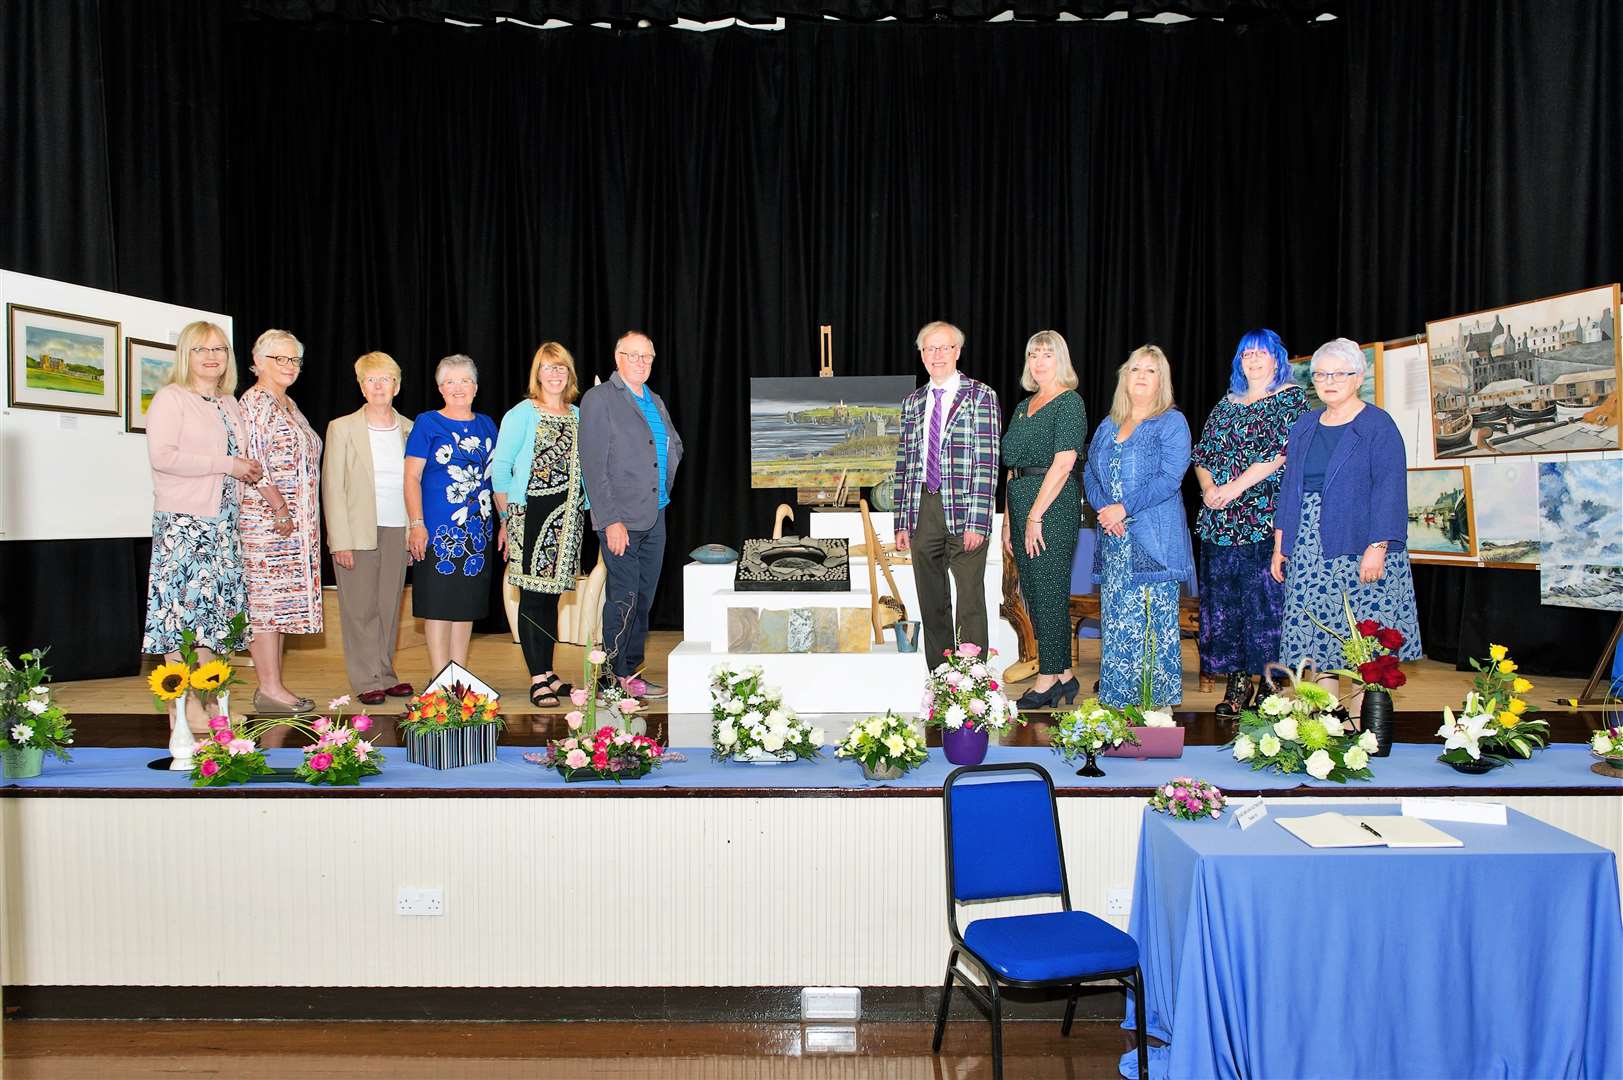 Members of the Society of Caithness Artists at their last show at Thurso High School in 2019. Photo: Angus Mackay